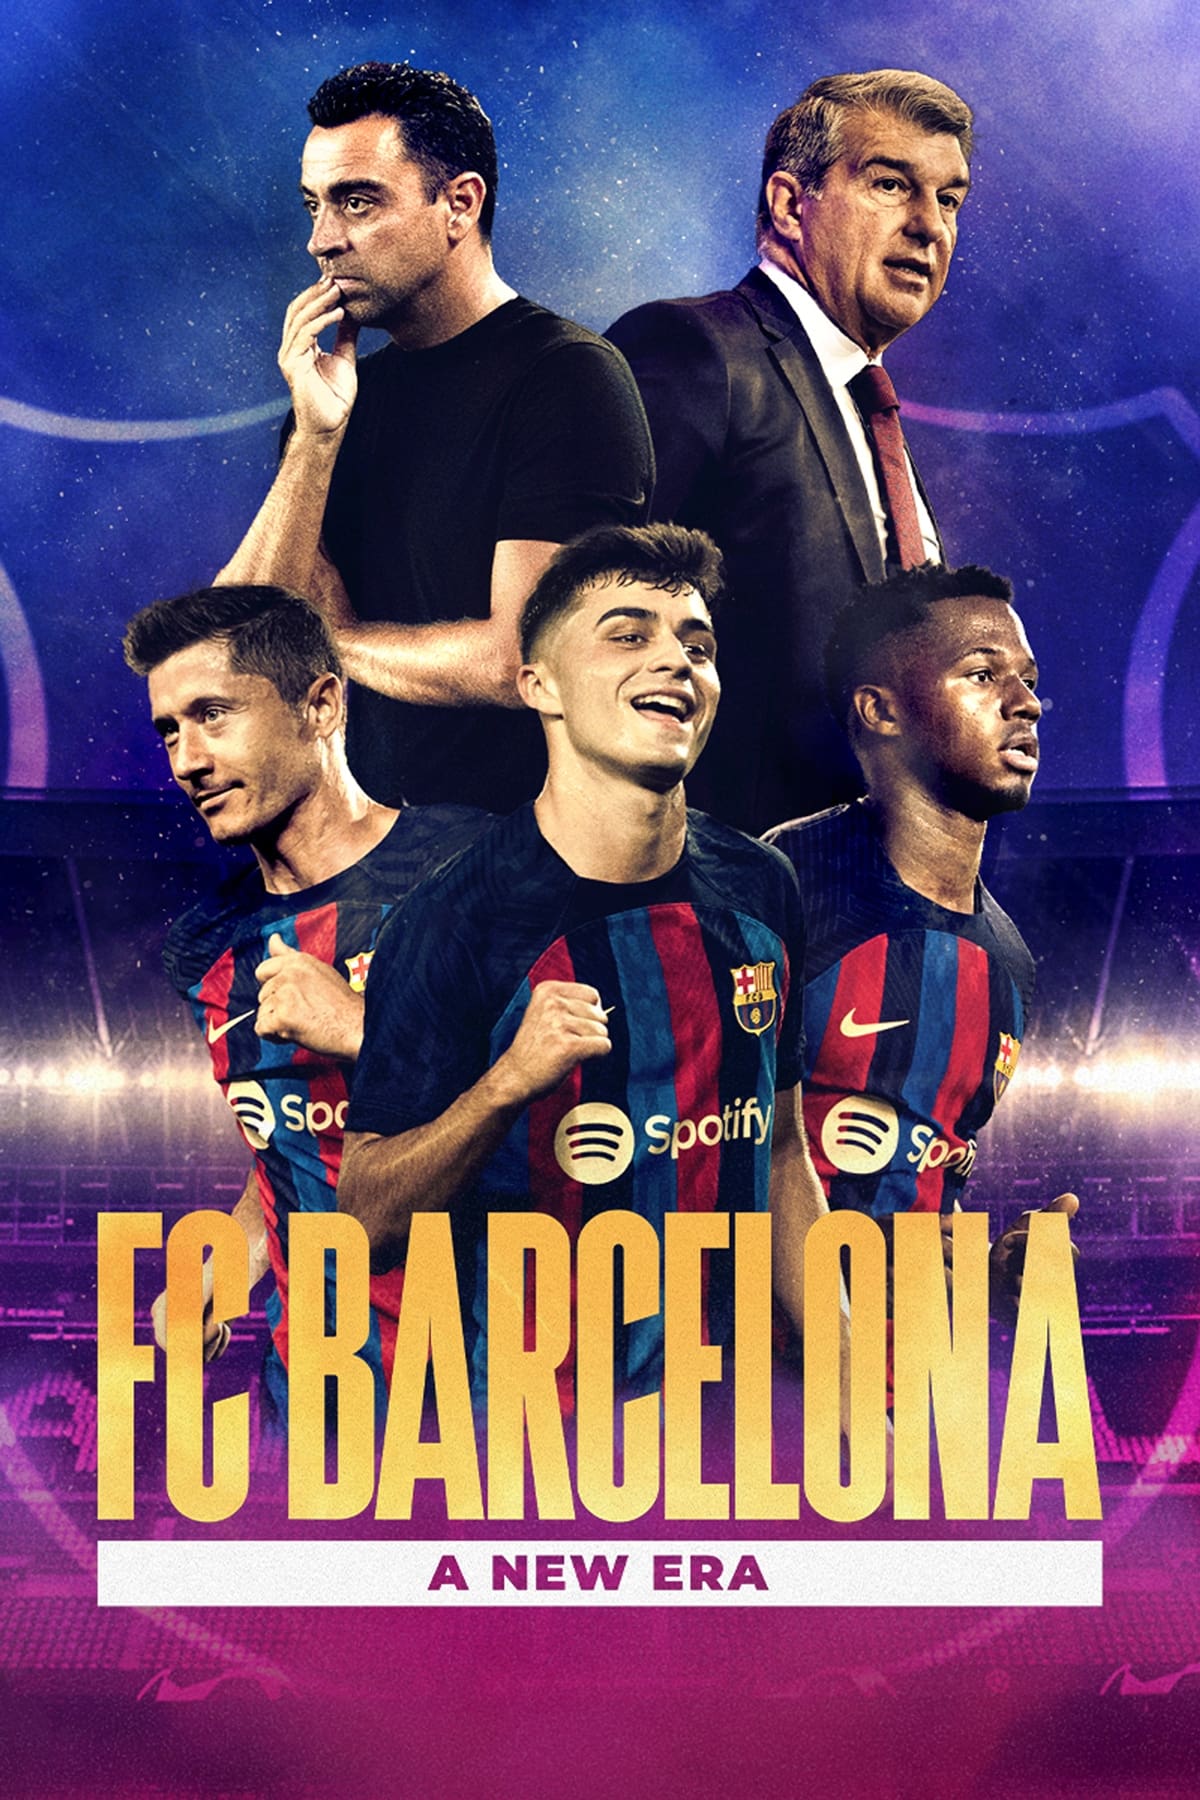 FC Barcelona: A New Era TV Shows About Club